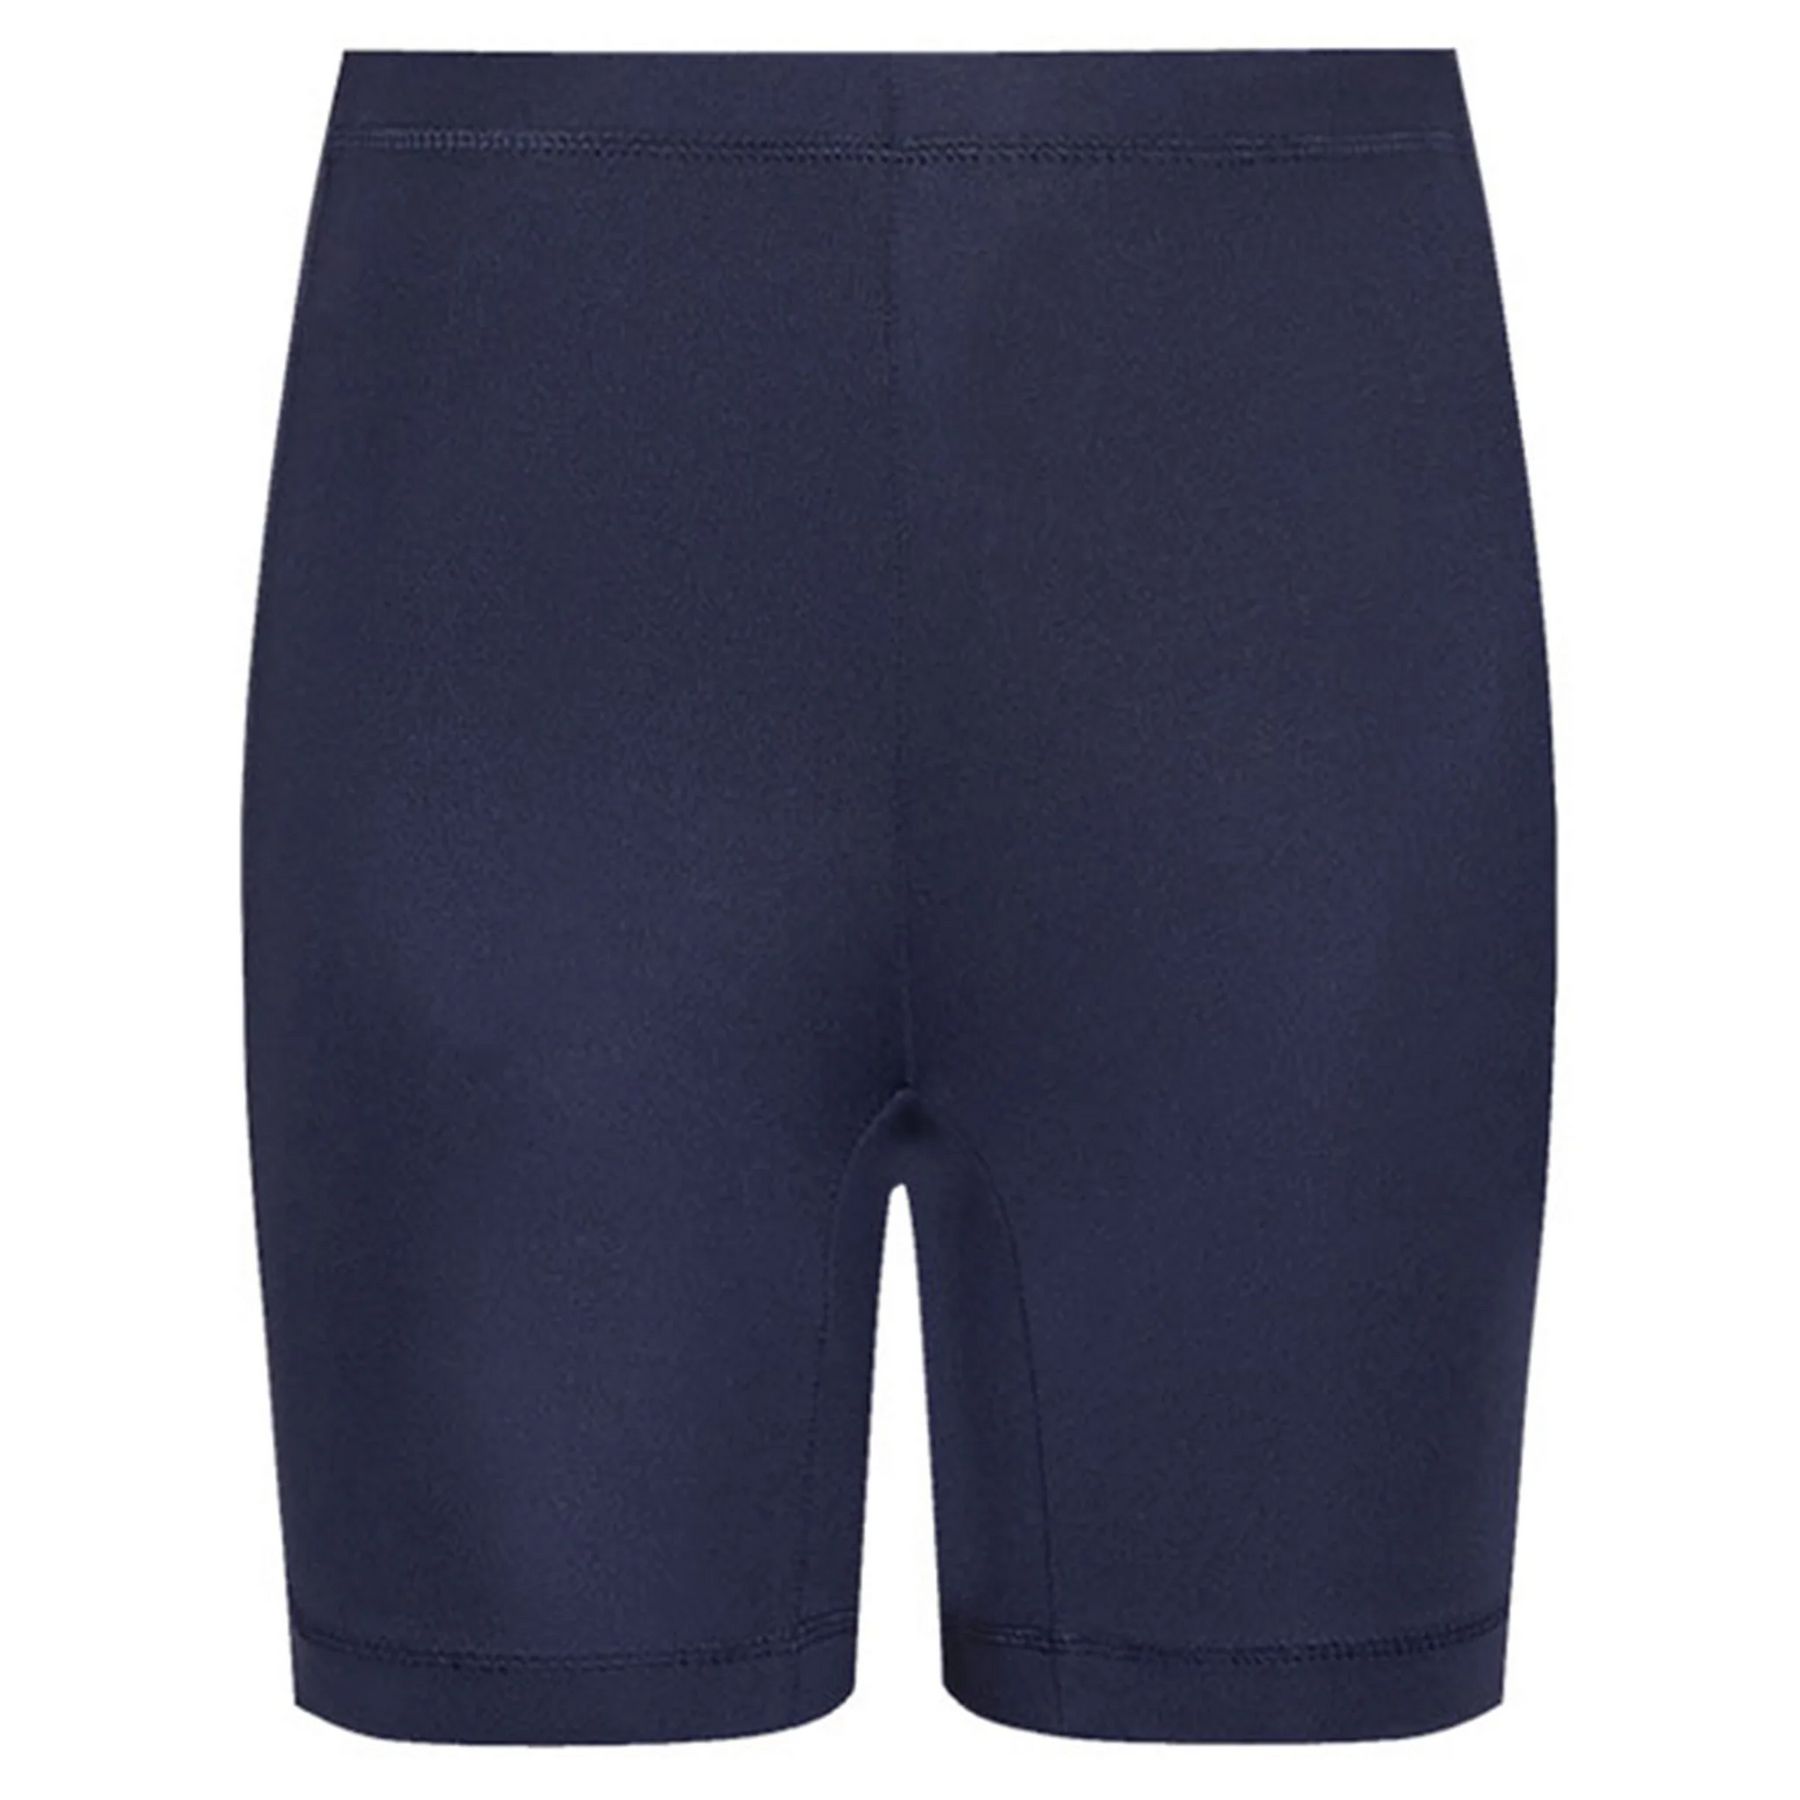 Dr Challoner's High School Cycle Shorts